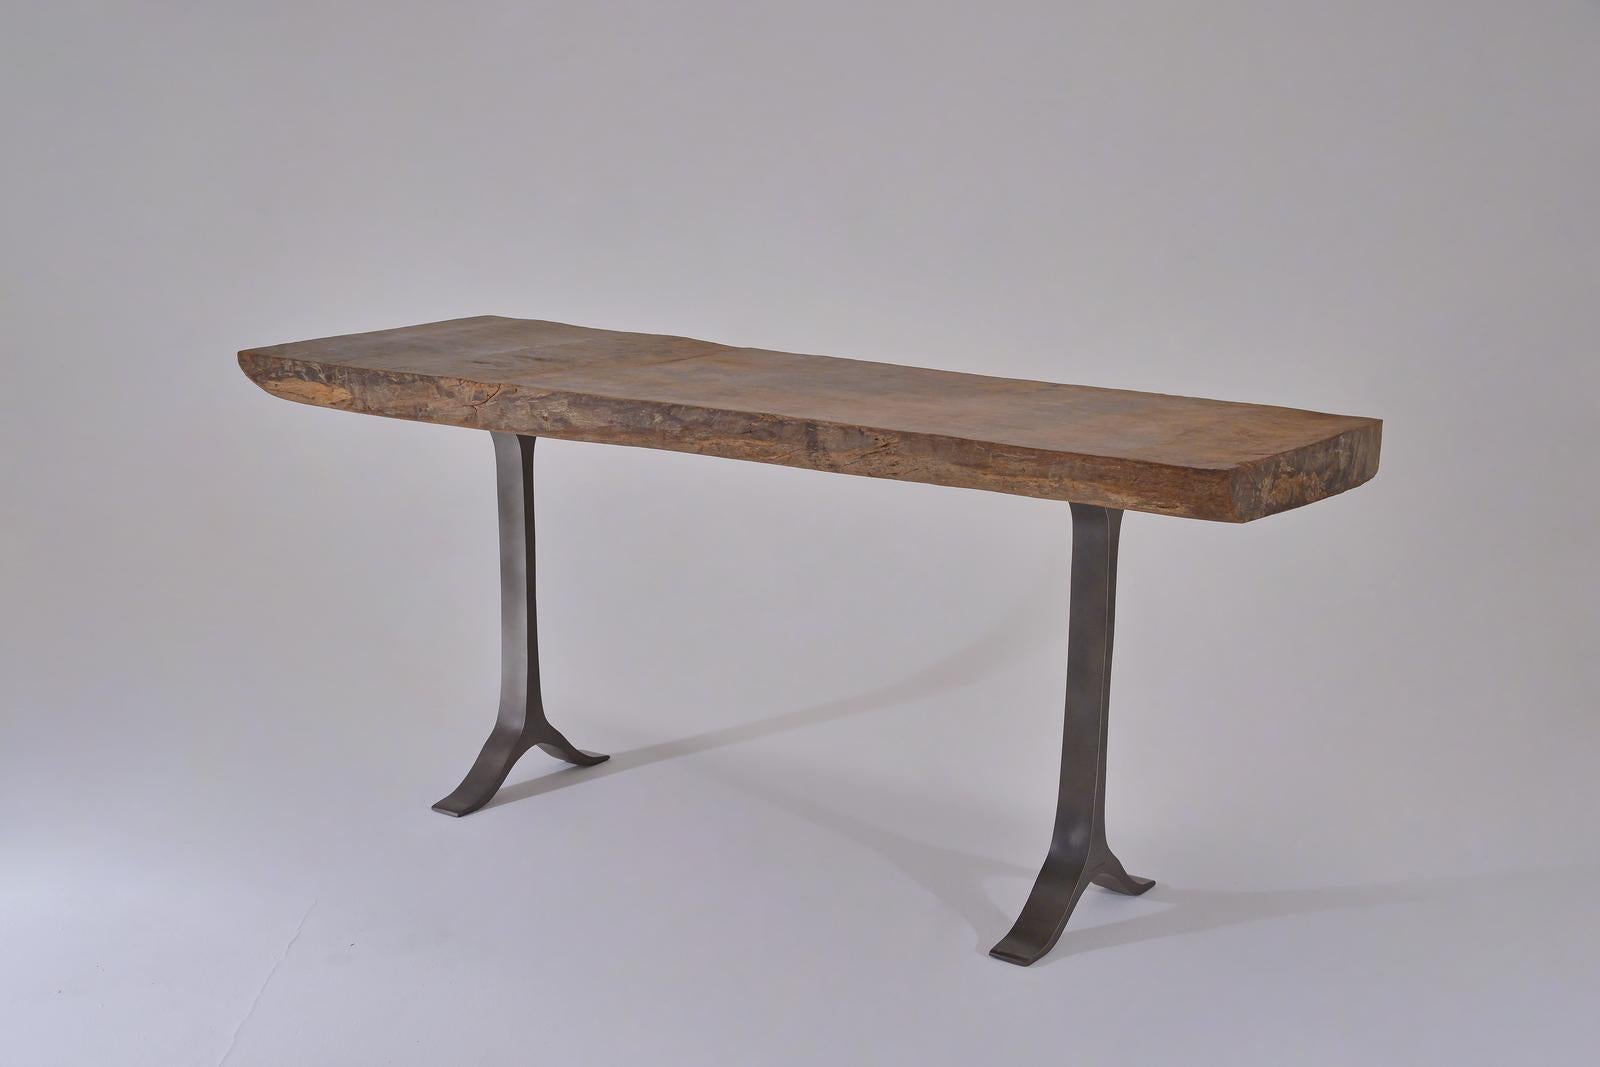 Model: ATOP-PT26-AL4-RAW-MK
Top: Single slab of antique hardwood
Top finish: Raw
Base: Aluminium 
Base finish: Brushed charcoal
Dimensions: 216 x 78 x 95 cm
(W x D x H) 85.04 x 30.71 x 37.4 inch
P. Tendercool ATOPs – tables made with antique